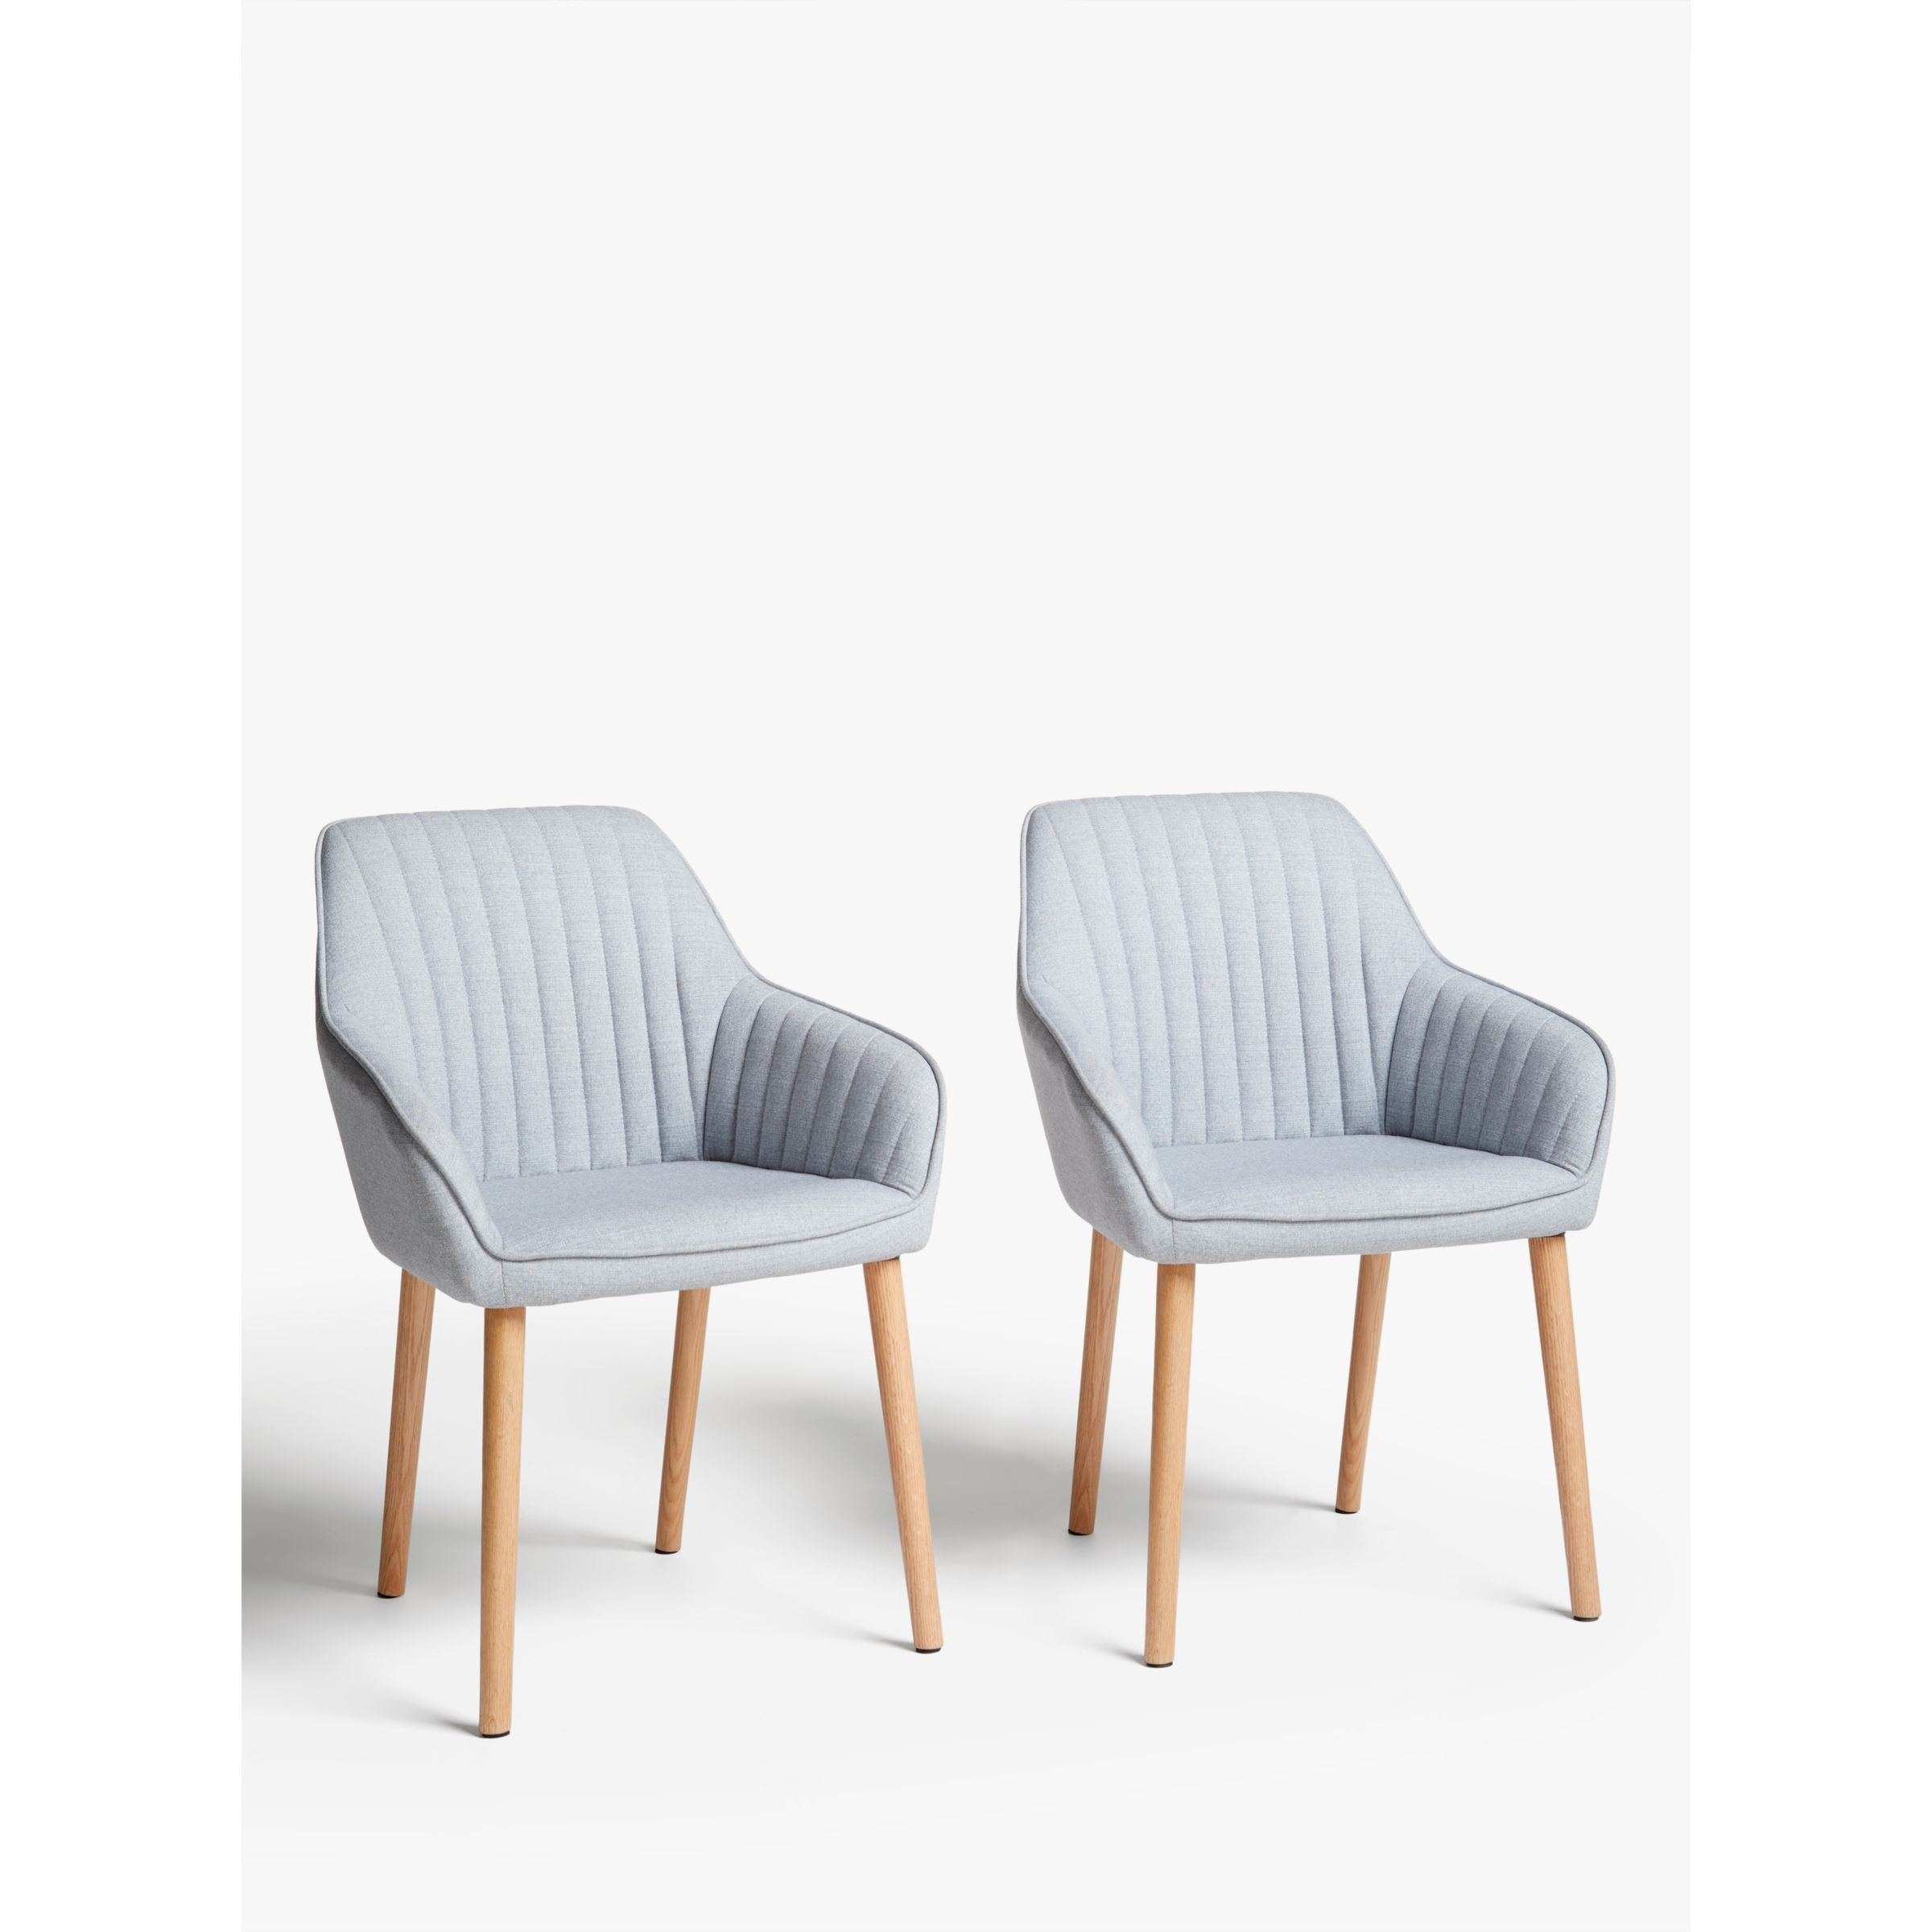 john lewis clearance chairs